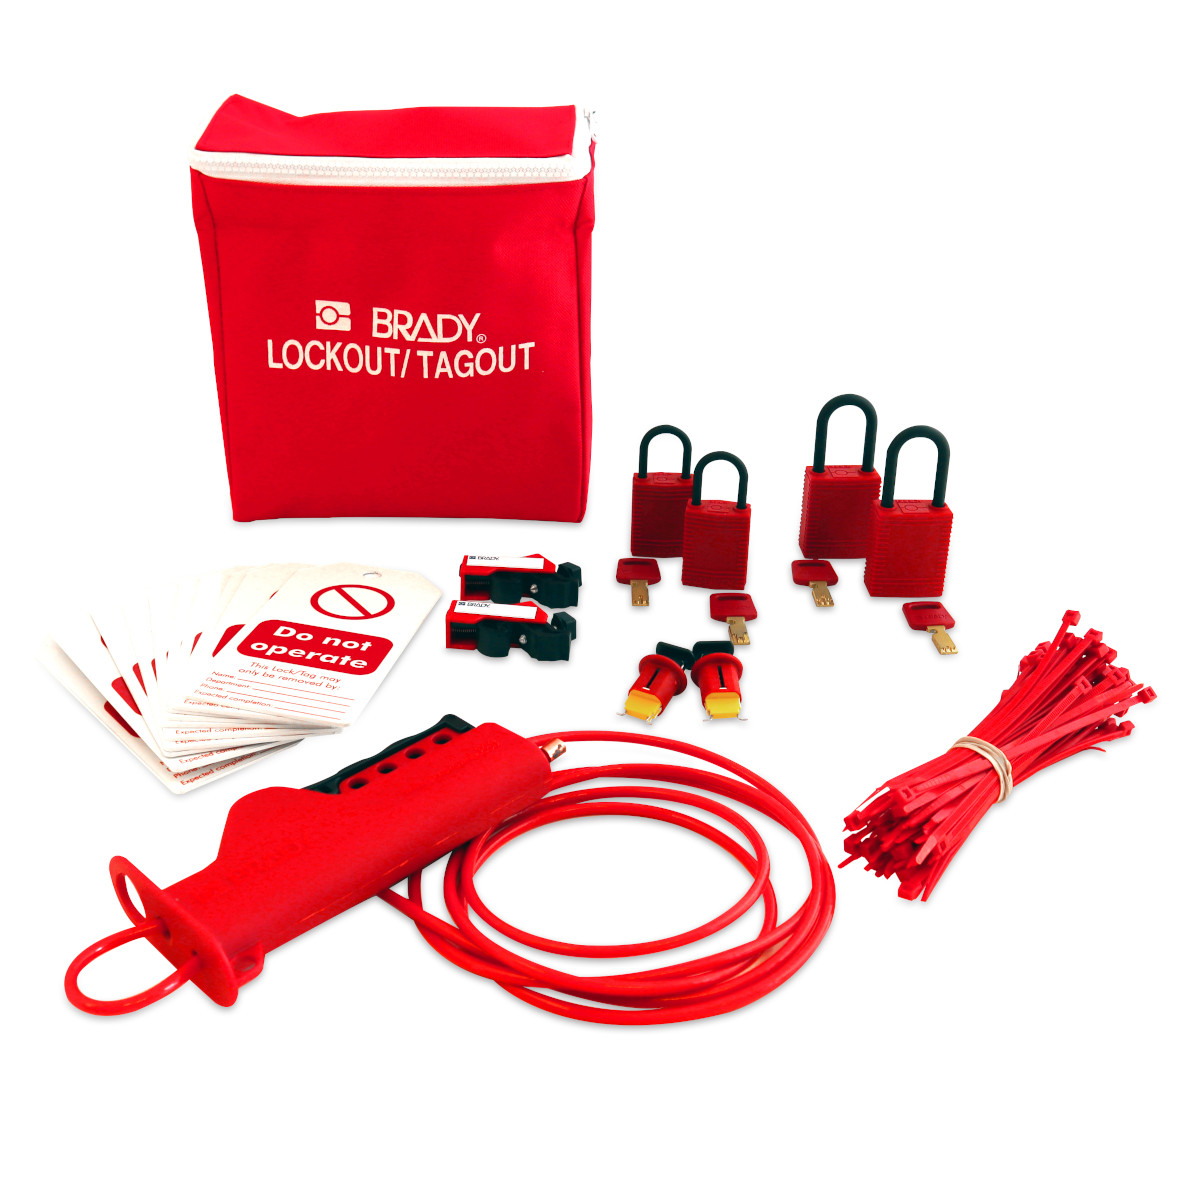 Wind Engineer Electrical Isolation Kit - Small